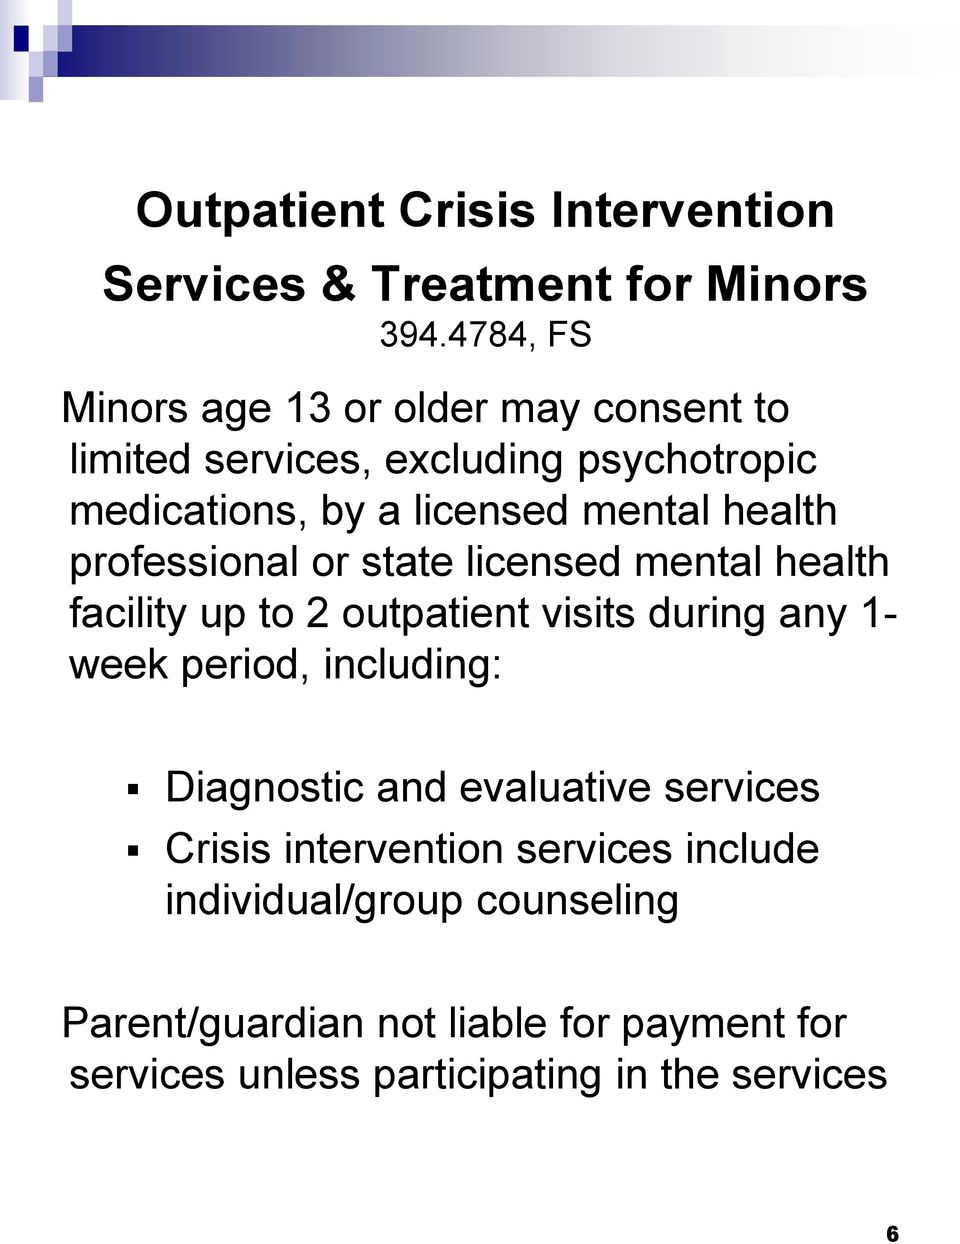 health professional or state licensed mental health facility up to 2 outpatient visits during any 1- week period, including: